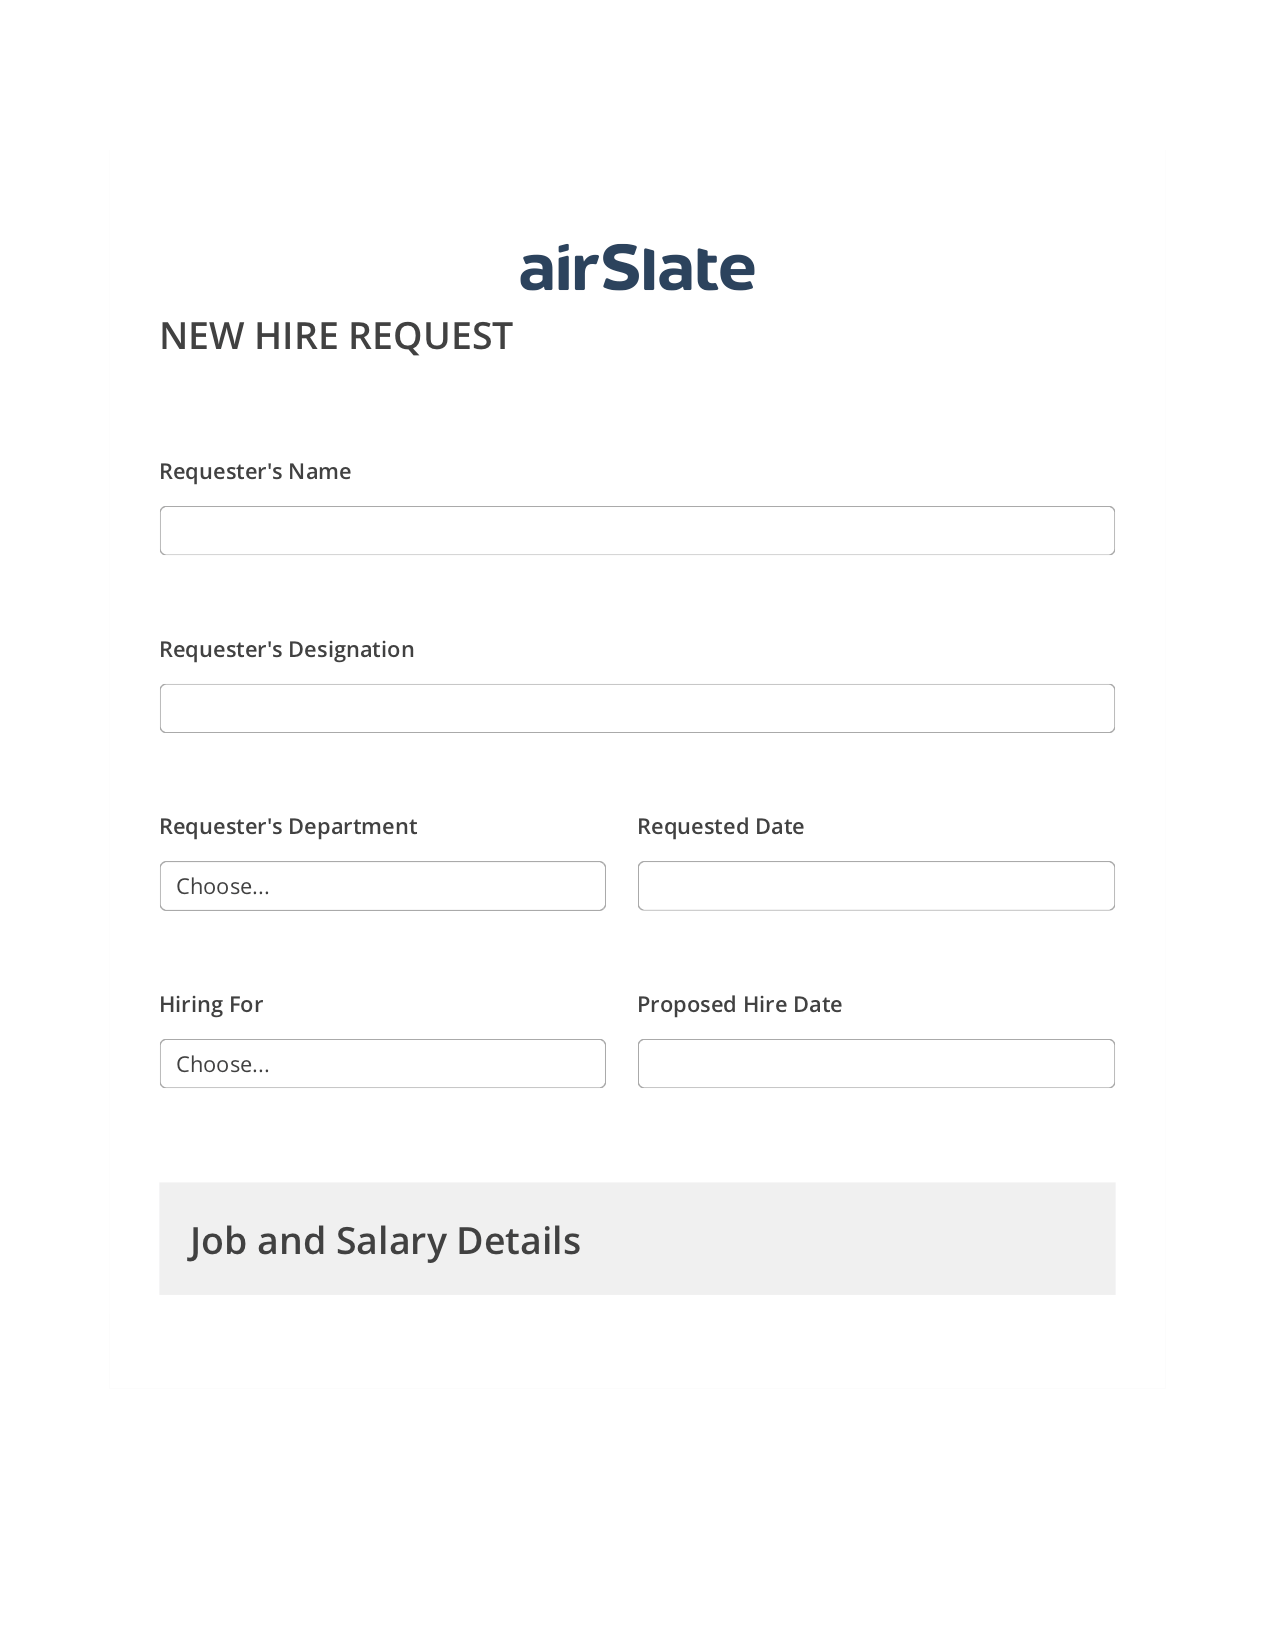 Hiring Request Workflow Pre-fill Dropdowns from Airtable, Assign Roles to Recipients Bot, Post-finish Document Bot